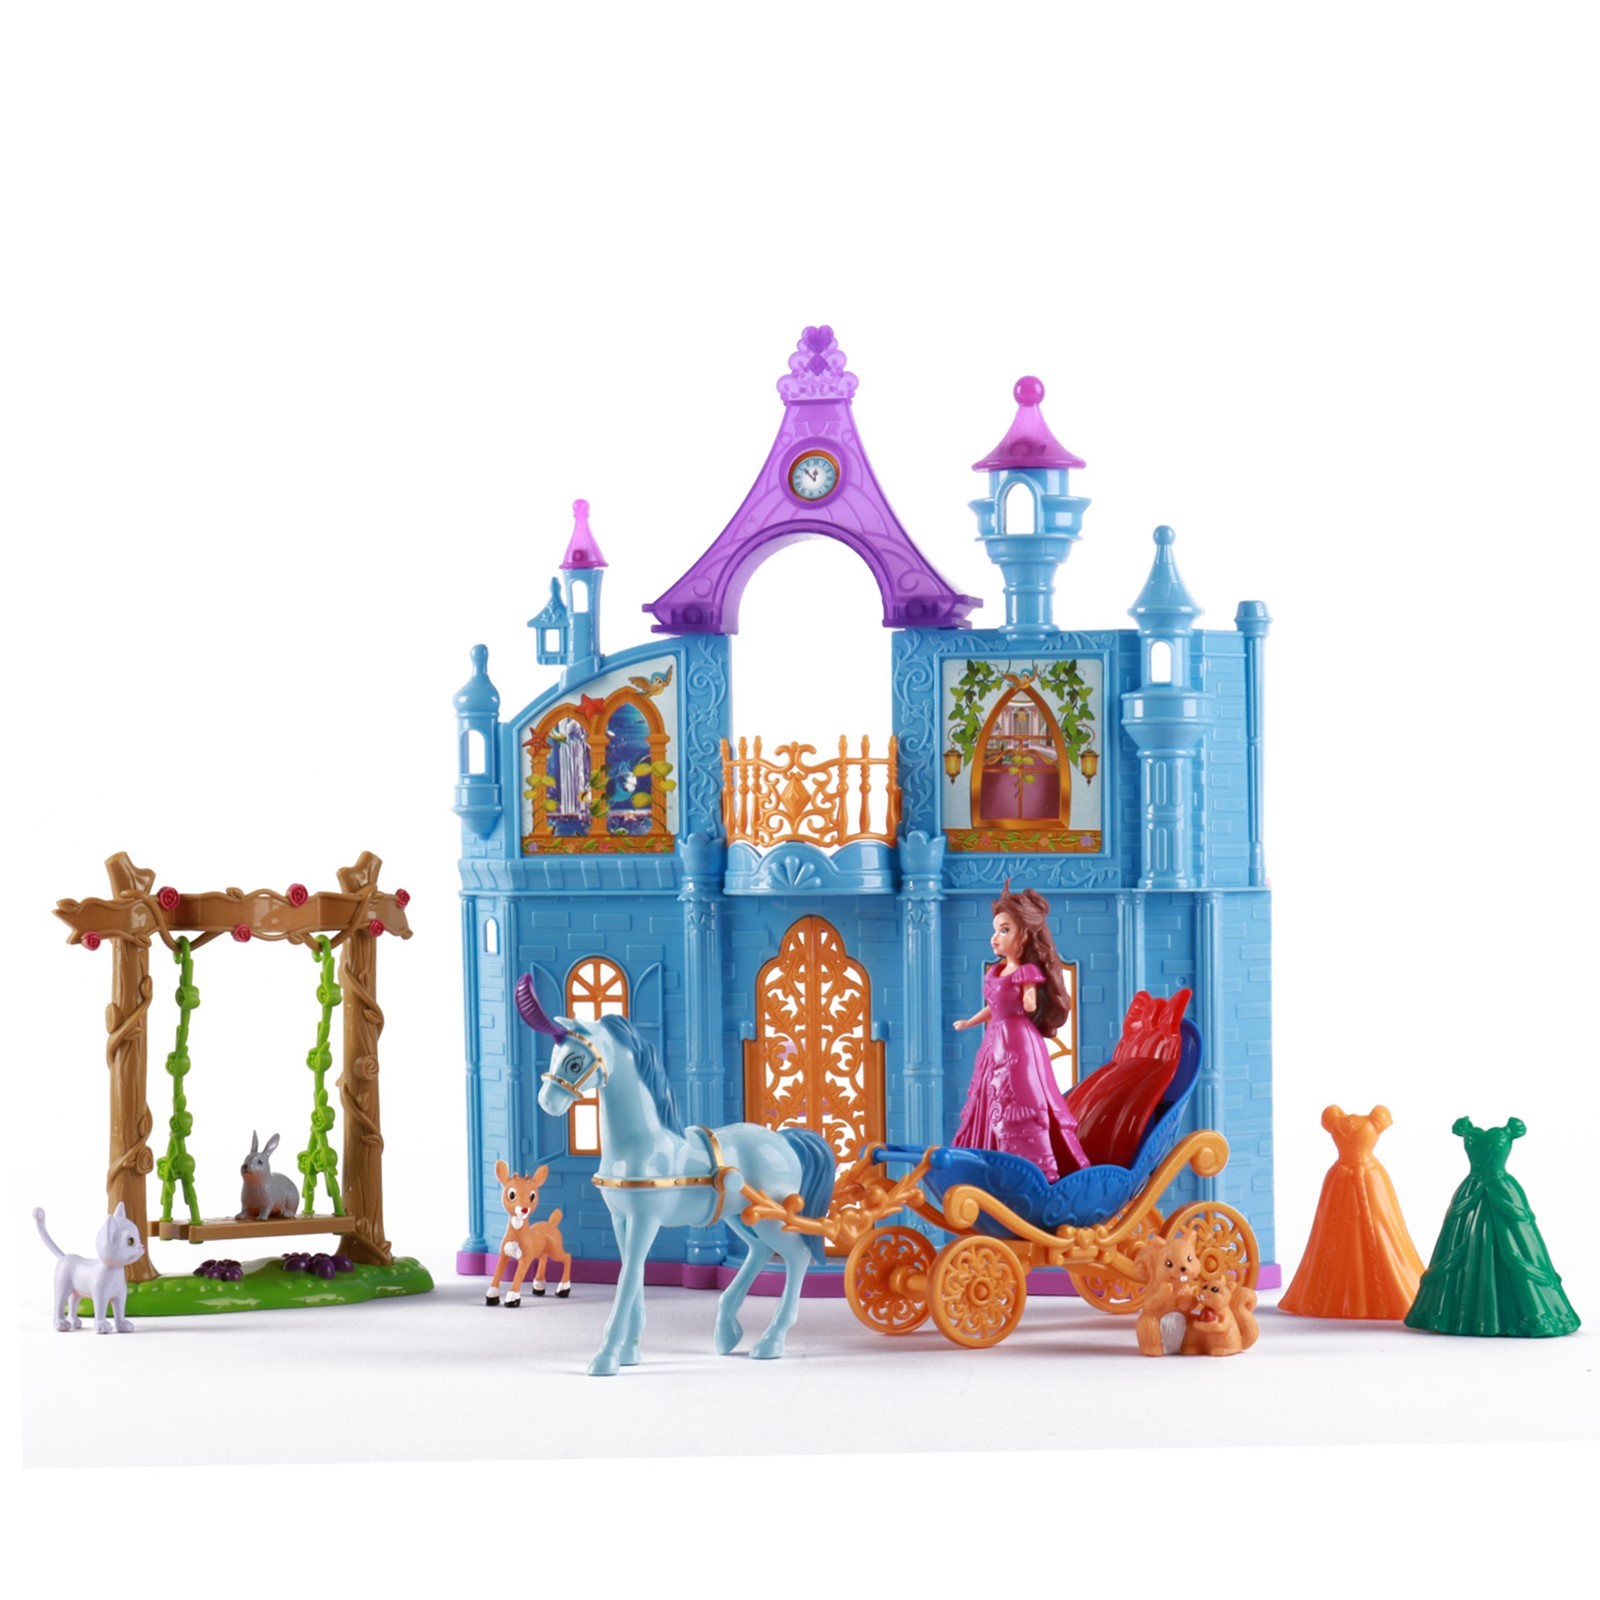 Princess Castle Deluxe Playset With Animal Friends Enchanted Swing Magical Horse And Carriage 3 Wardrobe Options Children\'s Pretend Play Perfect Early Learning Educational Preschool Girls Toys